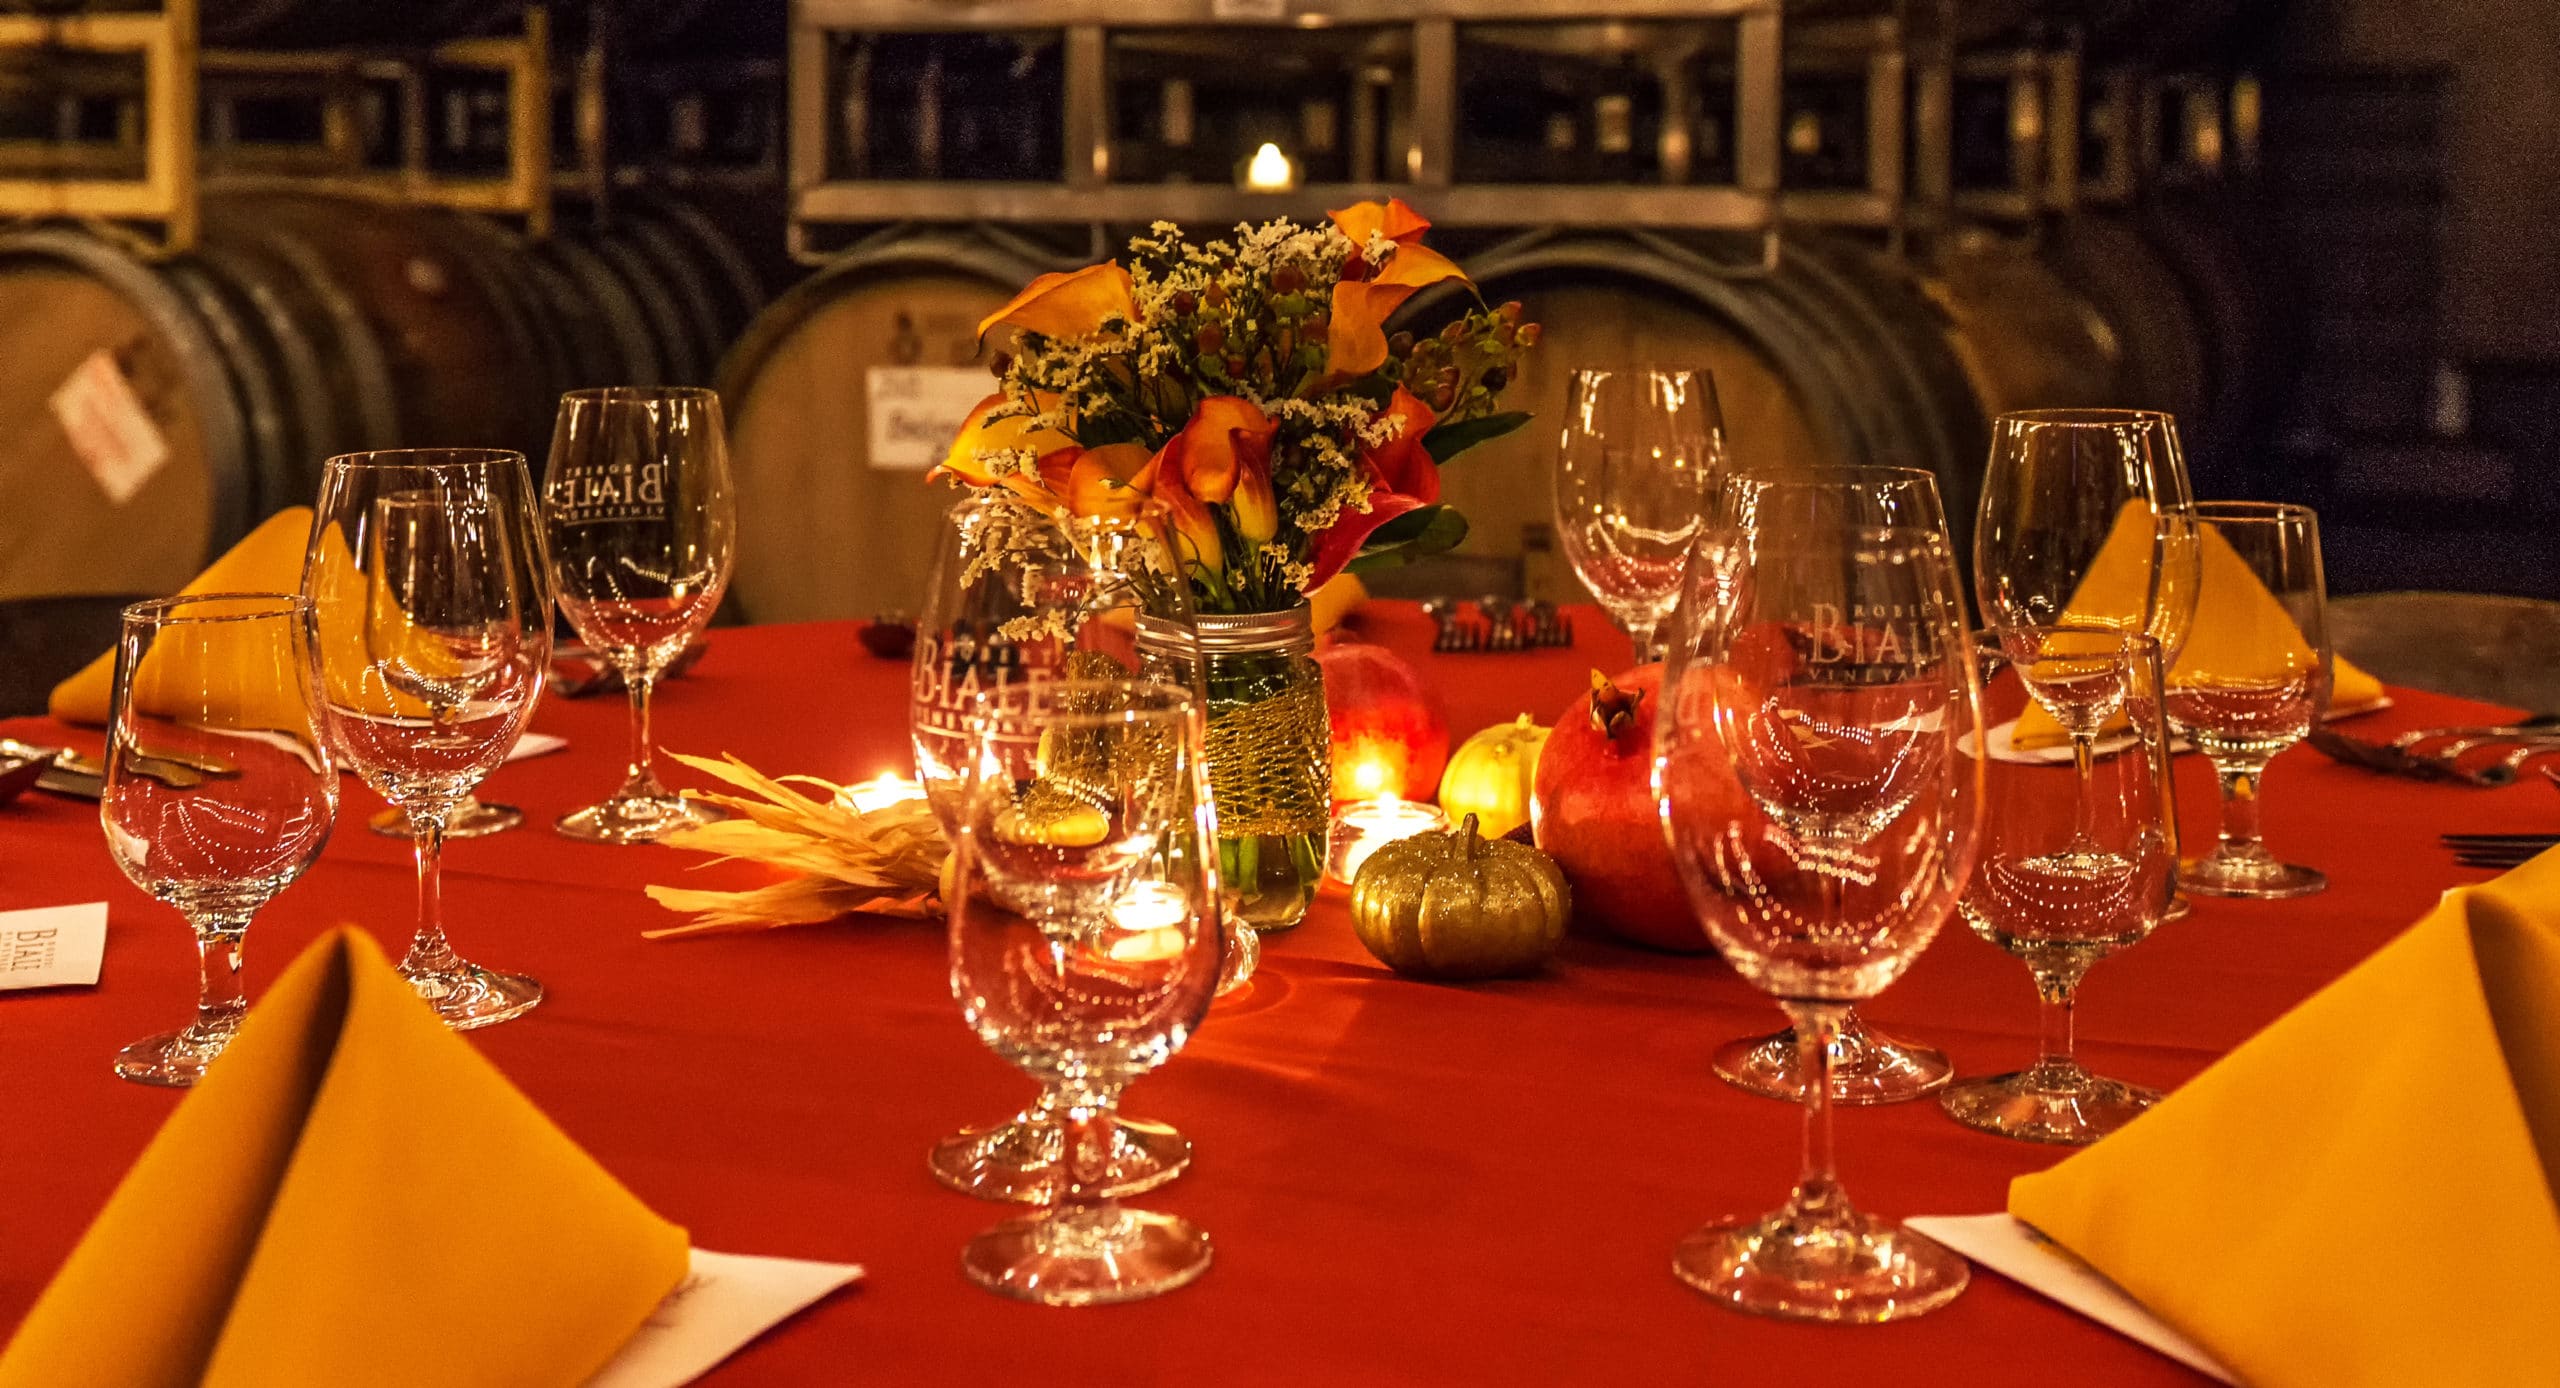 tablescape with red tablecloth and gold napkins with glasses and centerpieces, set in the Biale wine cellar